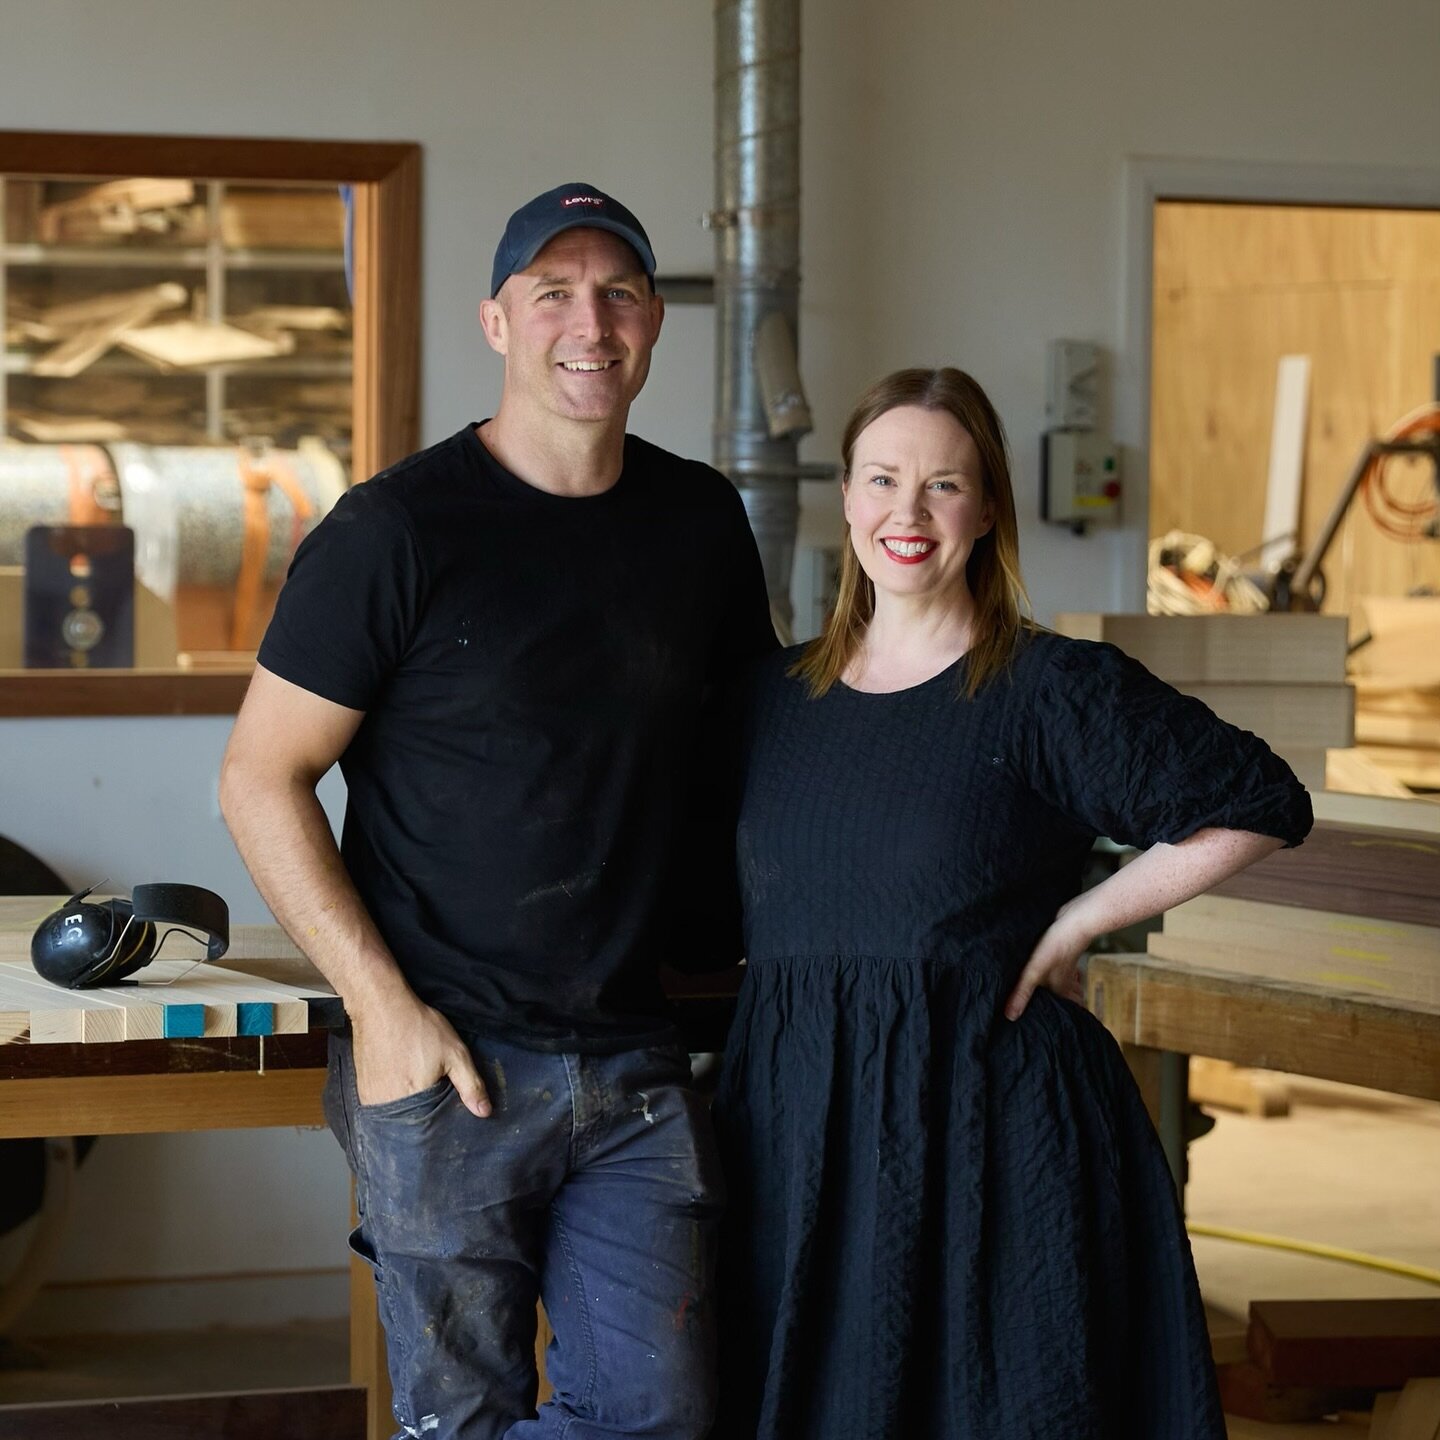 Coming soon in 2024&hellip; 

New year, new website and most importantly, a brand new collection of furniture designs. We can&rsquo;t wait to finally share what we&rsquo;ve been working on.

Big thanks to @mrhillstills for visiting us in our studio i